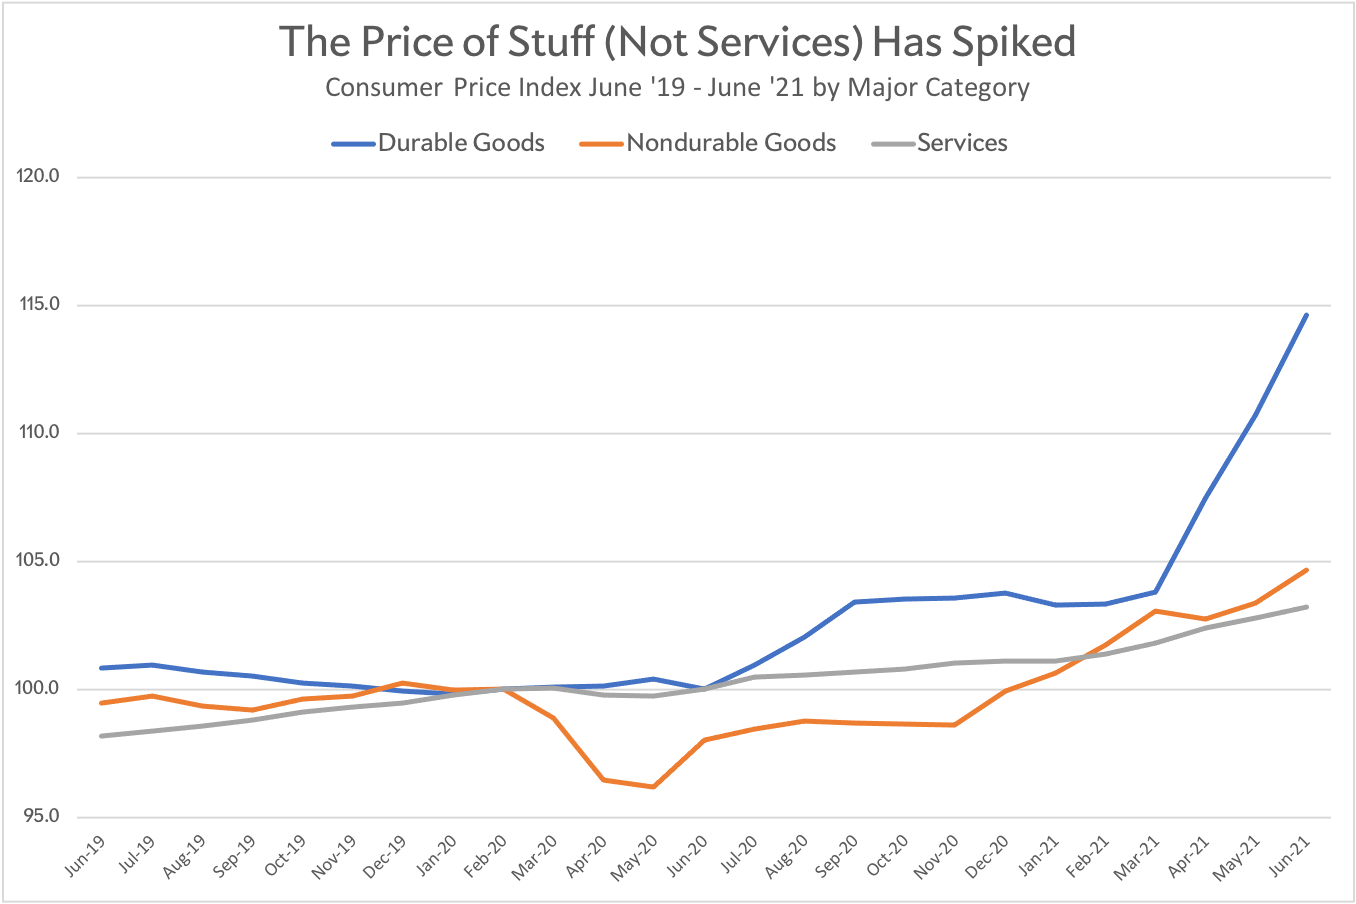 Chart showing sharp recent price increase for durable goods and lower increases for nondurable goods and services from June 2019 to June 2021